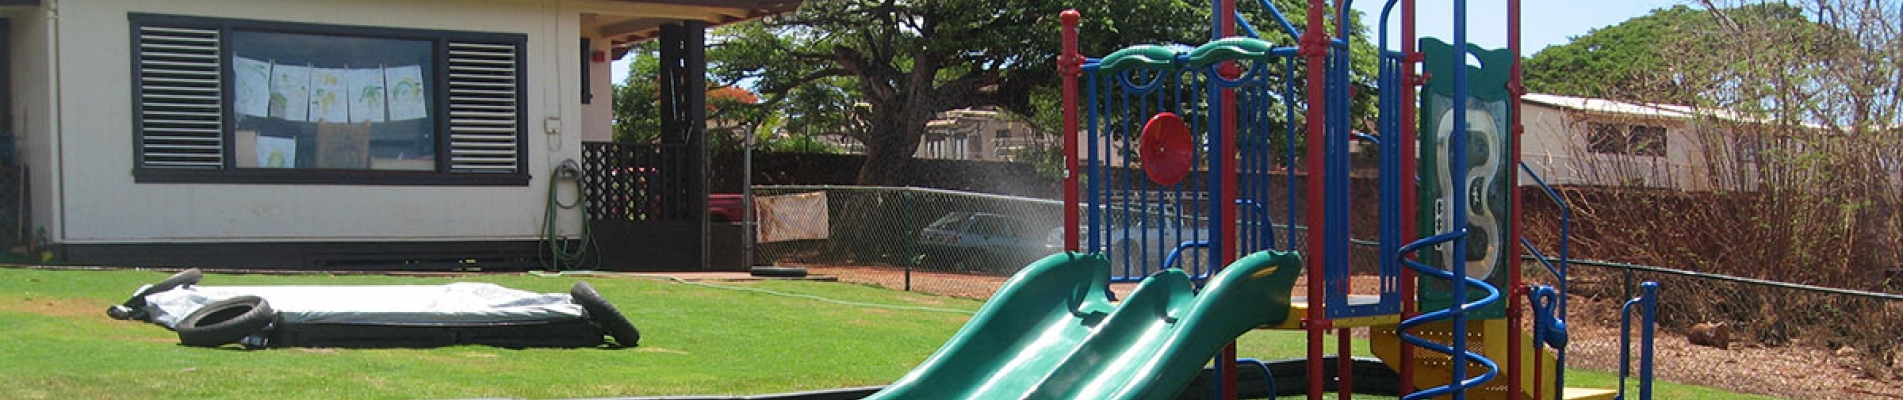 Usage of Artificial Grass in Children's Playgrounds